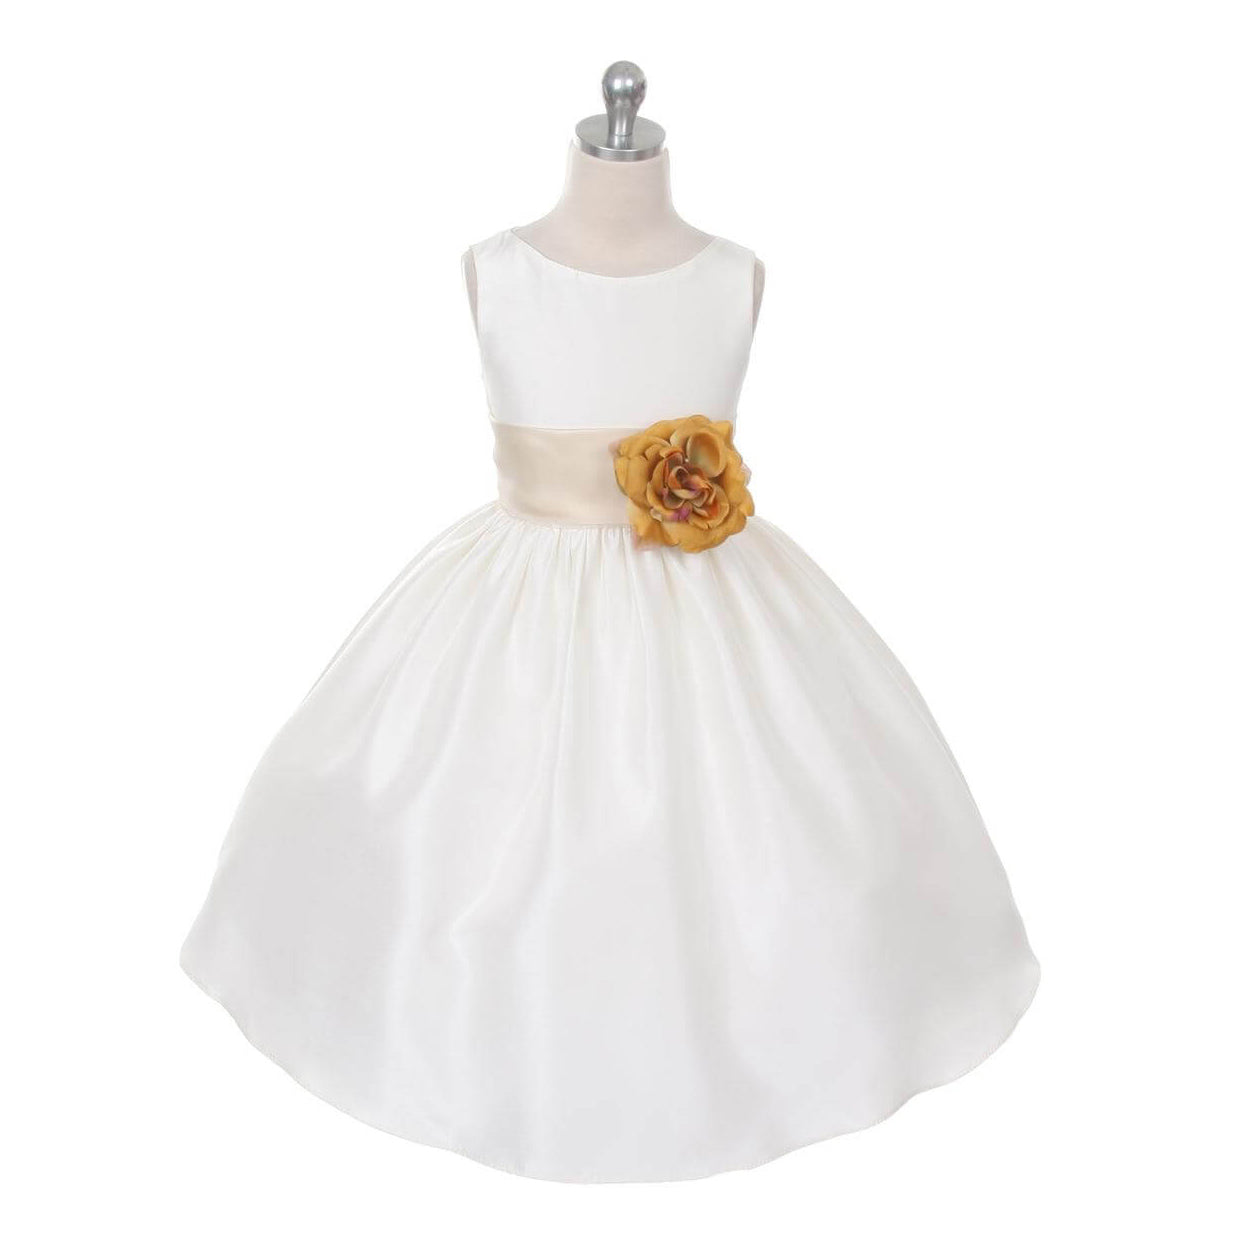 Morgan dress in white with gold sash on mannequin